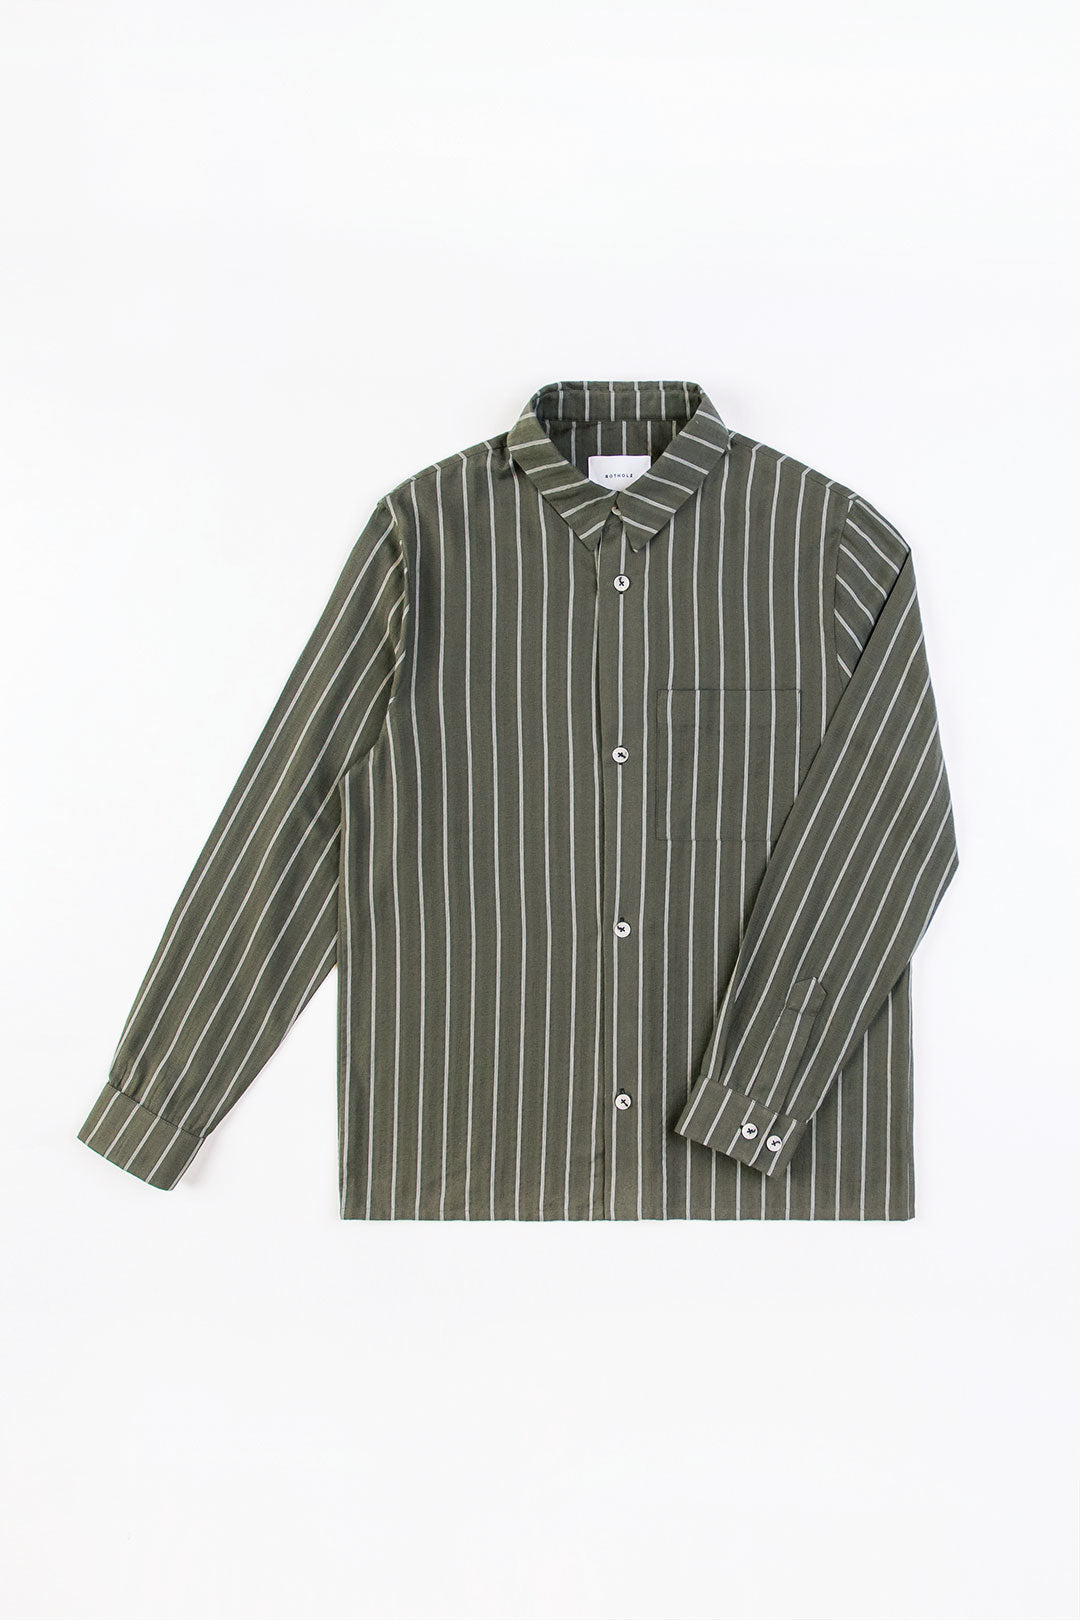 Olive, striped shirt made from 100% organic cotton from Rotholz